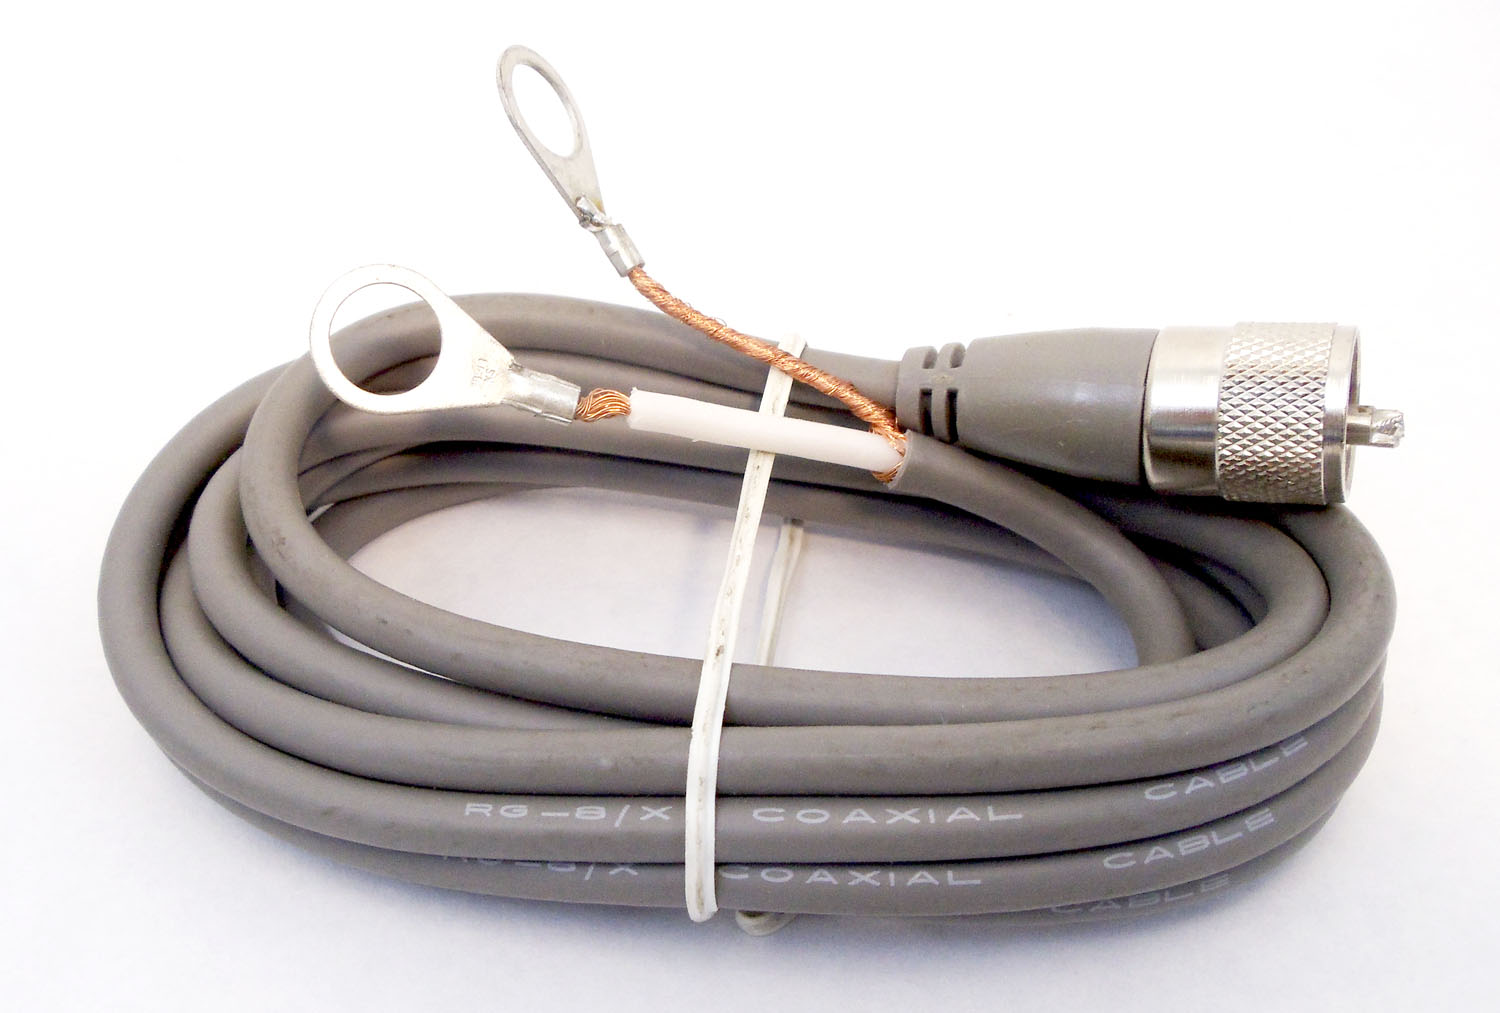 Marmat - 106" Rg8X Grey Coaxial Cable With 90% Sheild, Molded Pl259 Connector And Two Ring Terminals